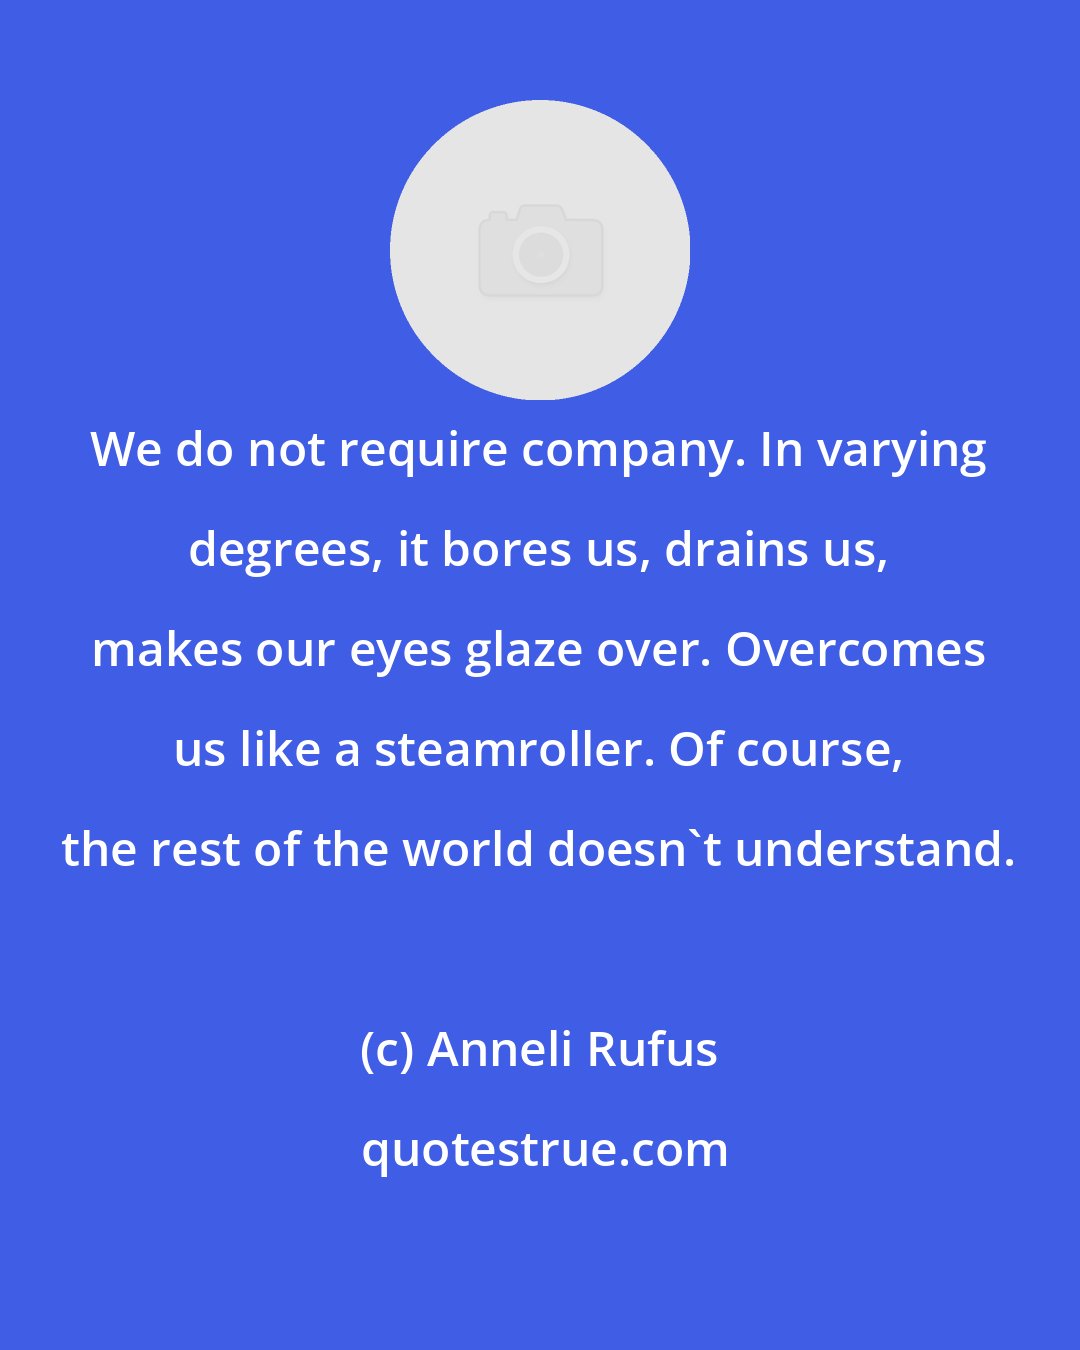 Anneli Rufus: We do not require company. In varying degrees, it bores us, drains us, makes our eyes glaze over. Overcomes us like a steamroller. Of course, the rest of the world doesn't understand.